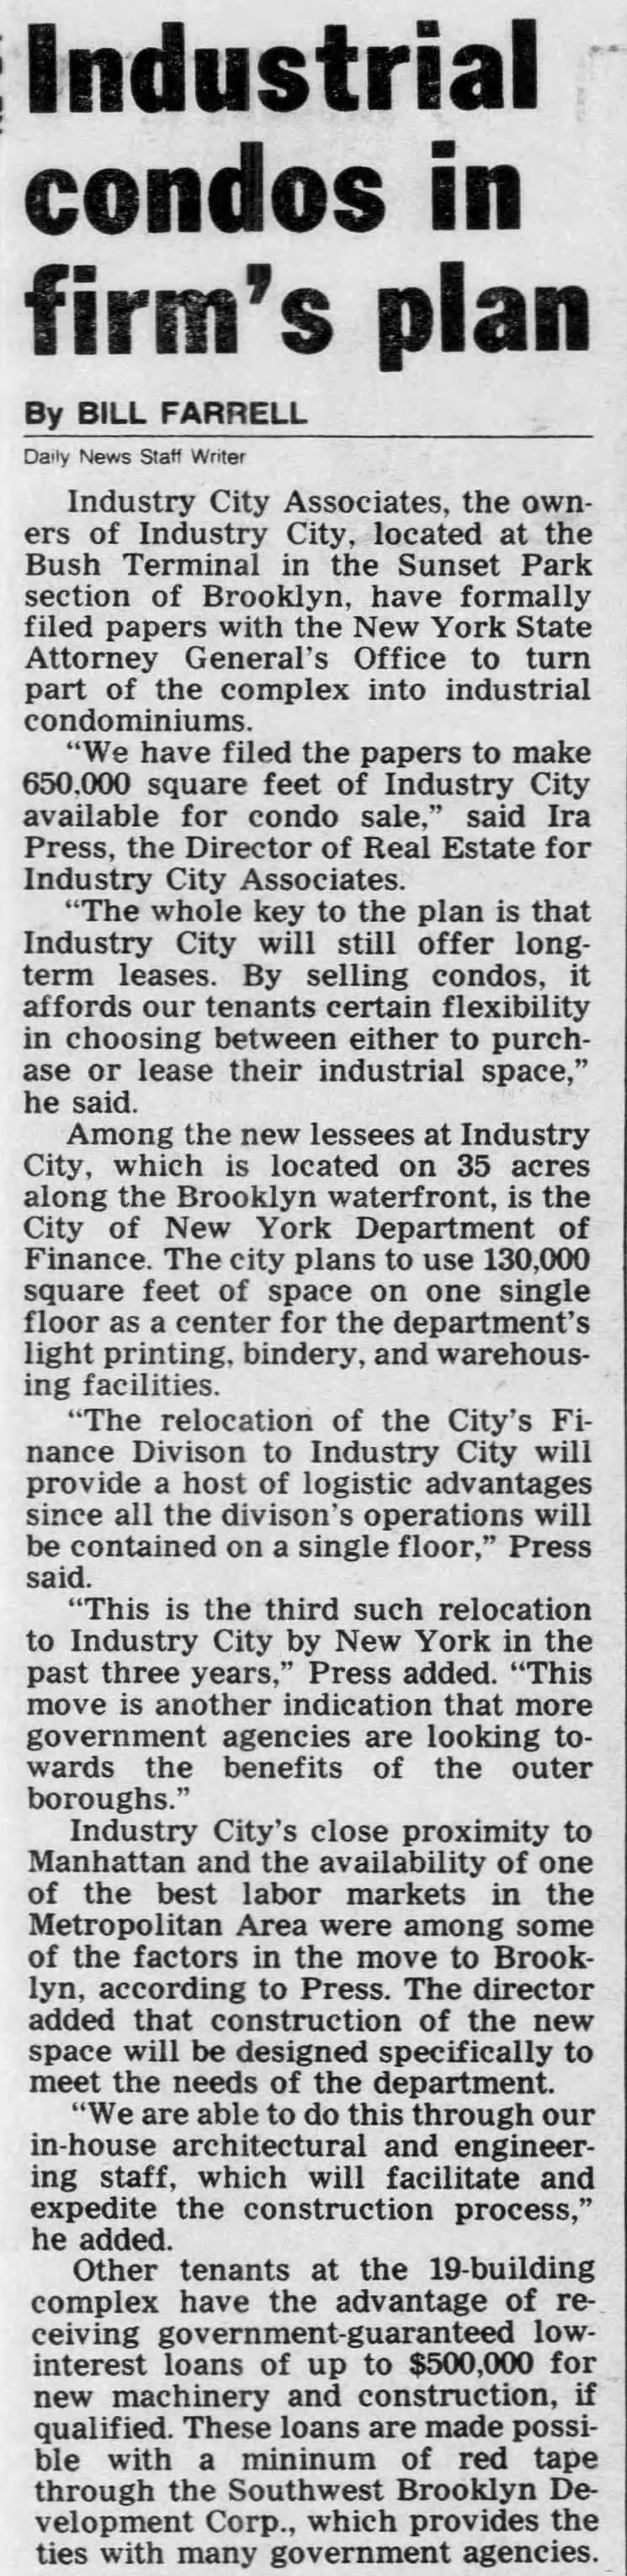 Industrial condos in firm's plan